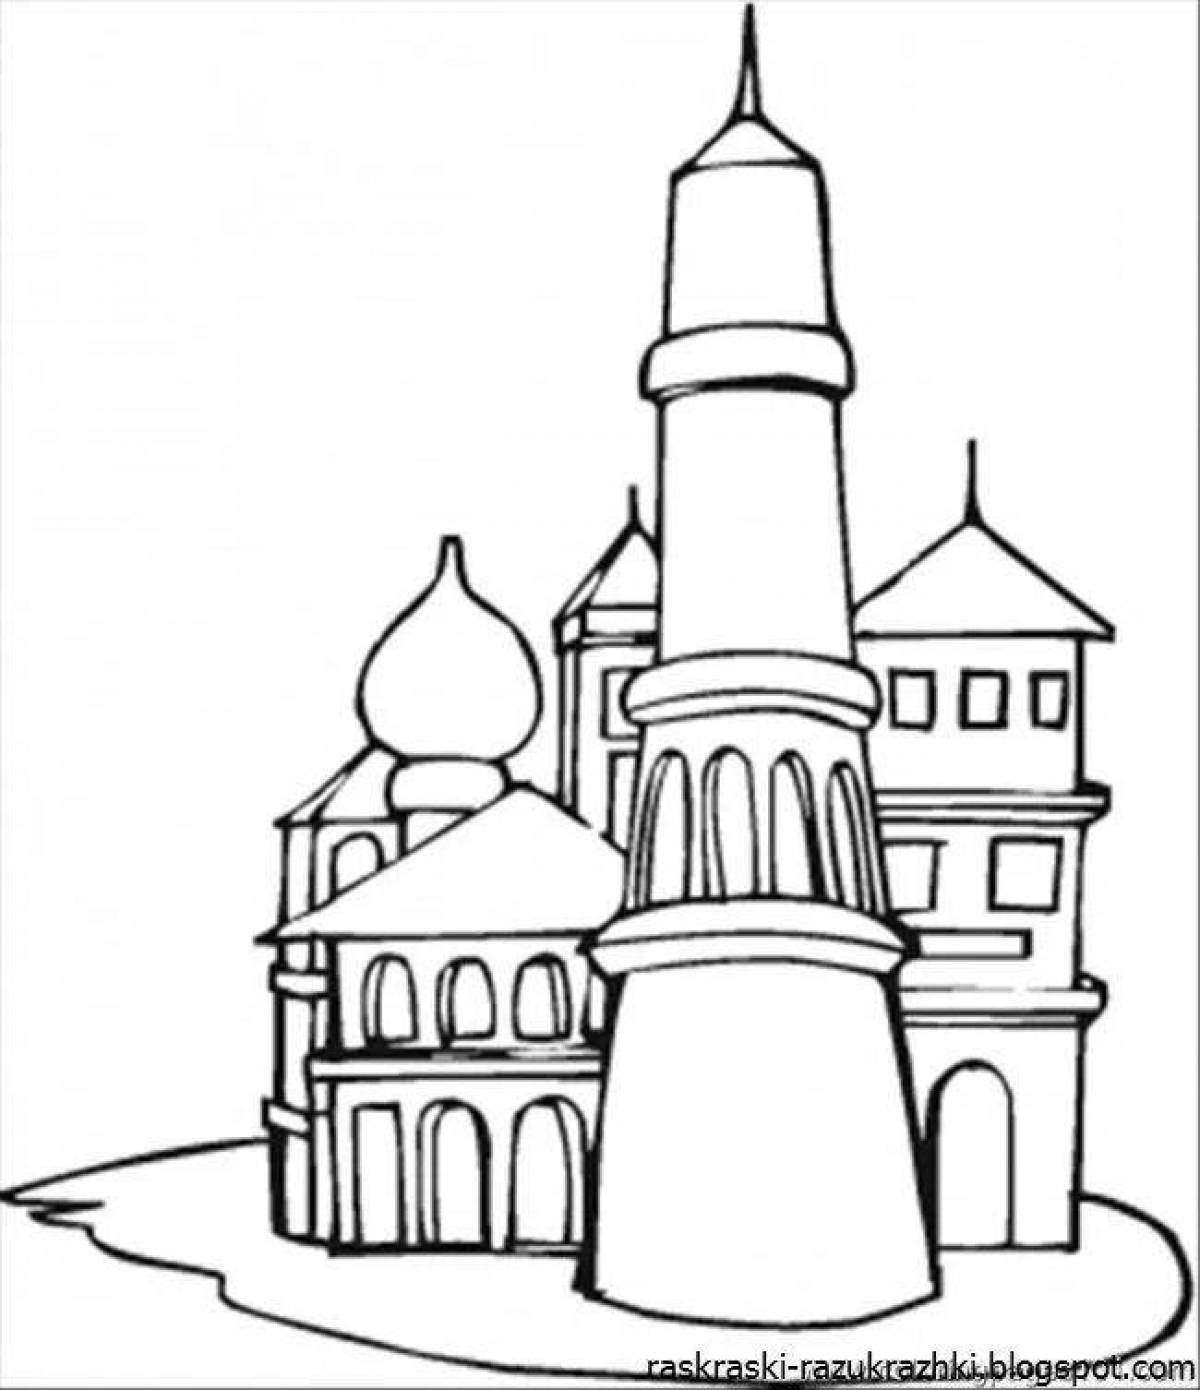 Amazing Russia coloring pages for kids